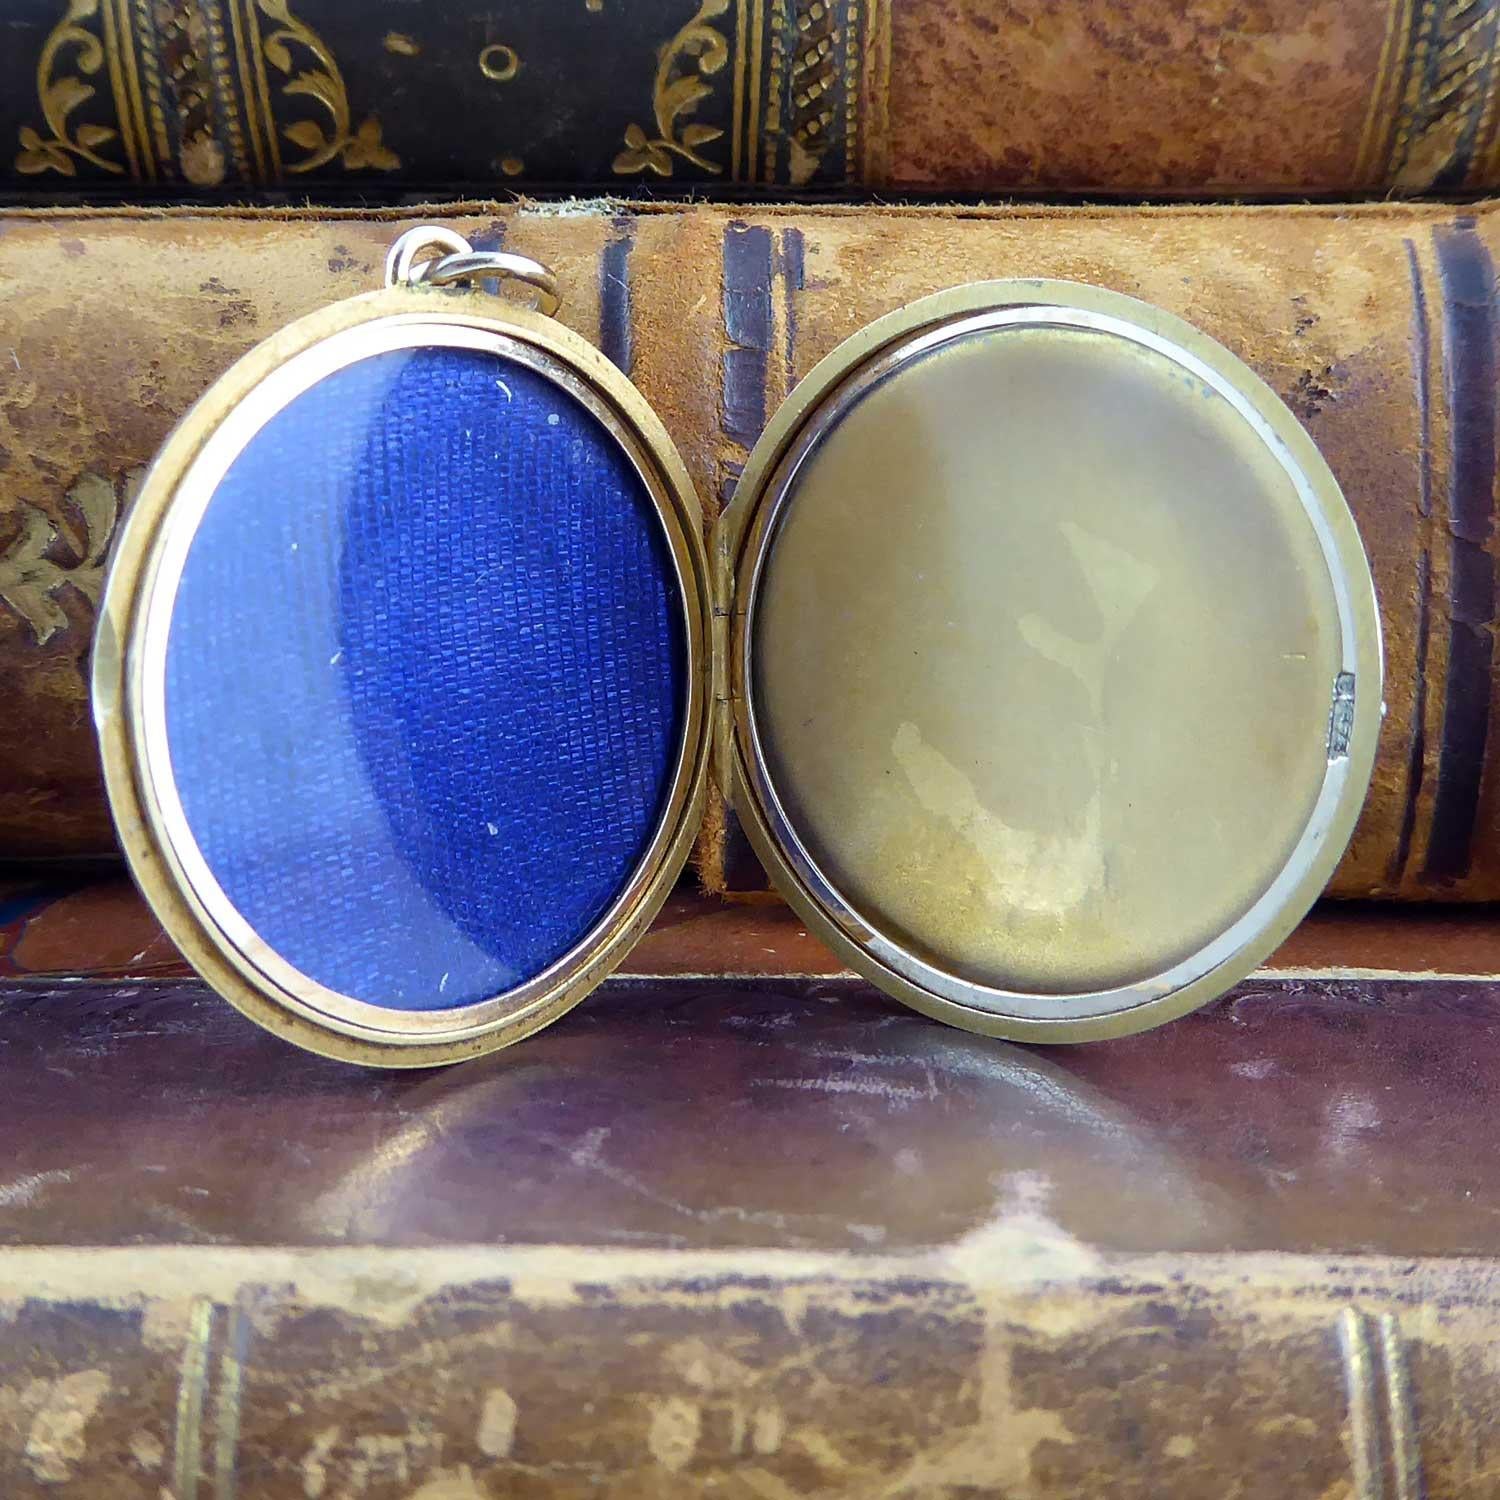 An antique locket created in 9ct gold without any pattern or engraving whatsoever.  The look is plain and simple but nontheless elegant for its restrained design.  Circular in shape with a raised edged border, the locket opens for photographs and